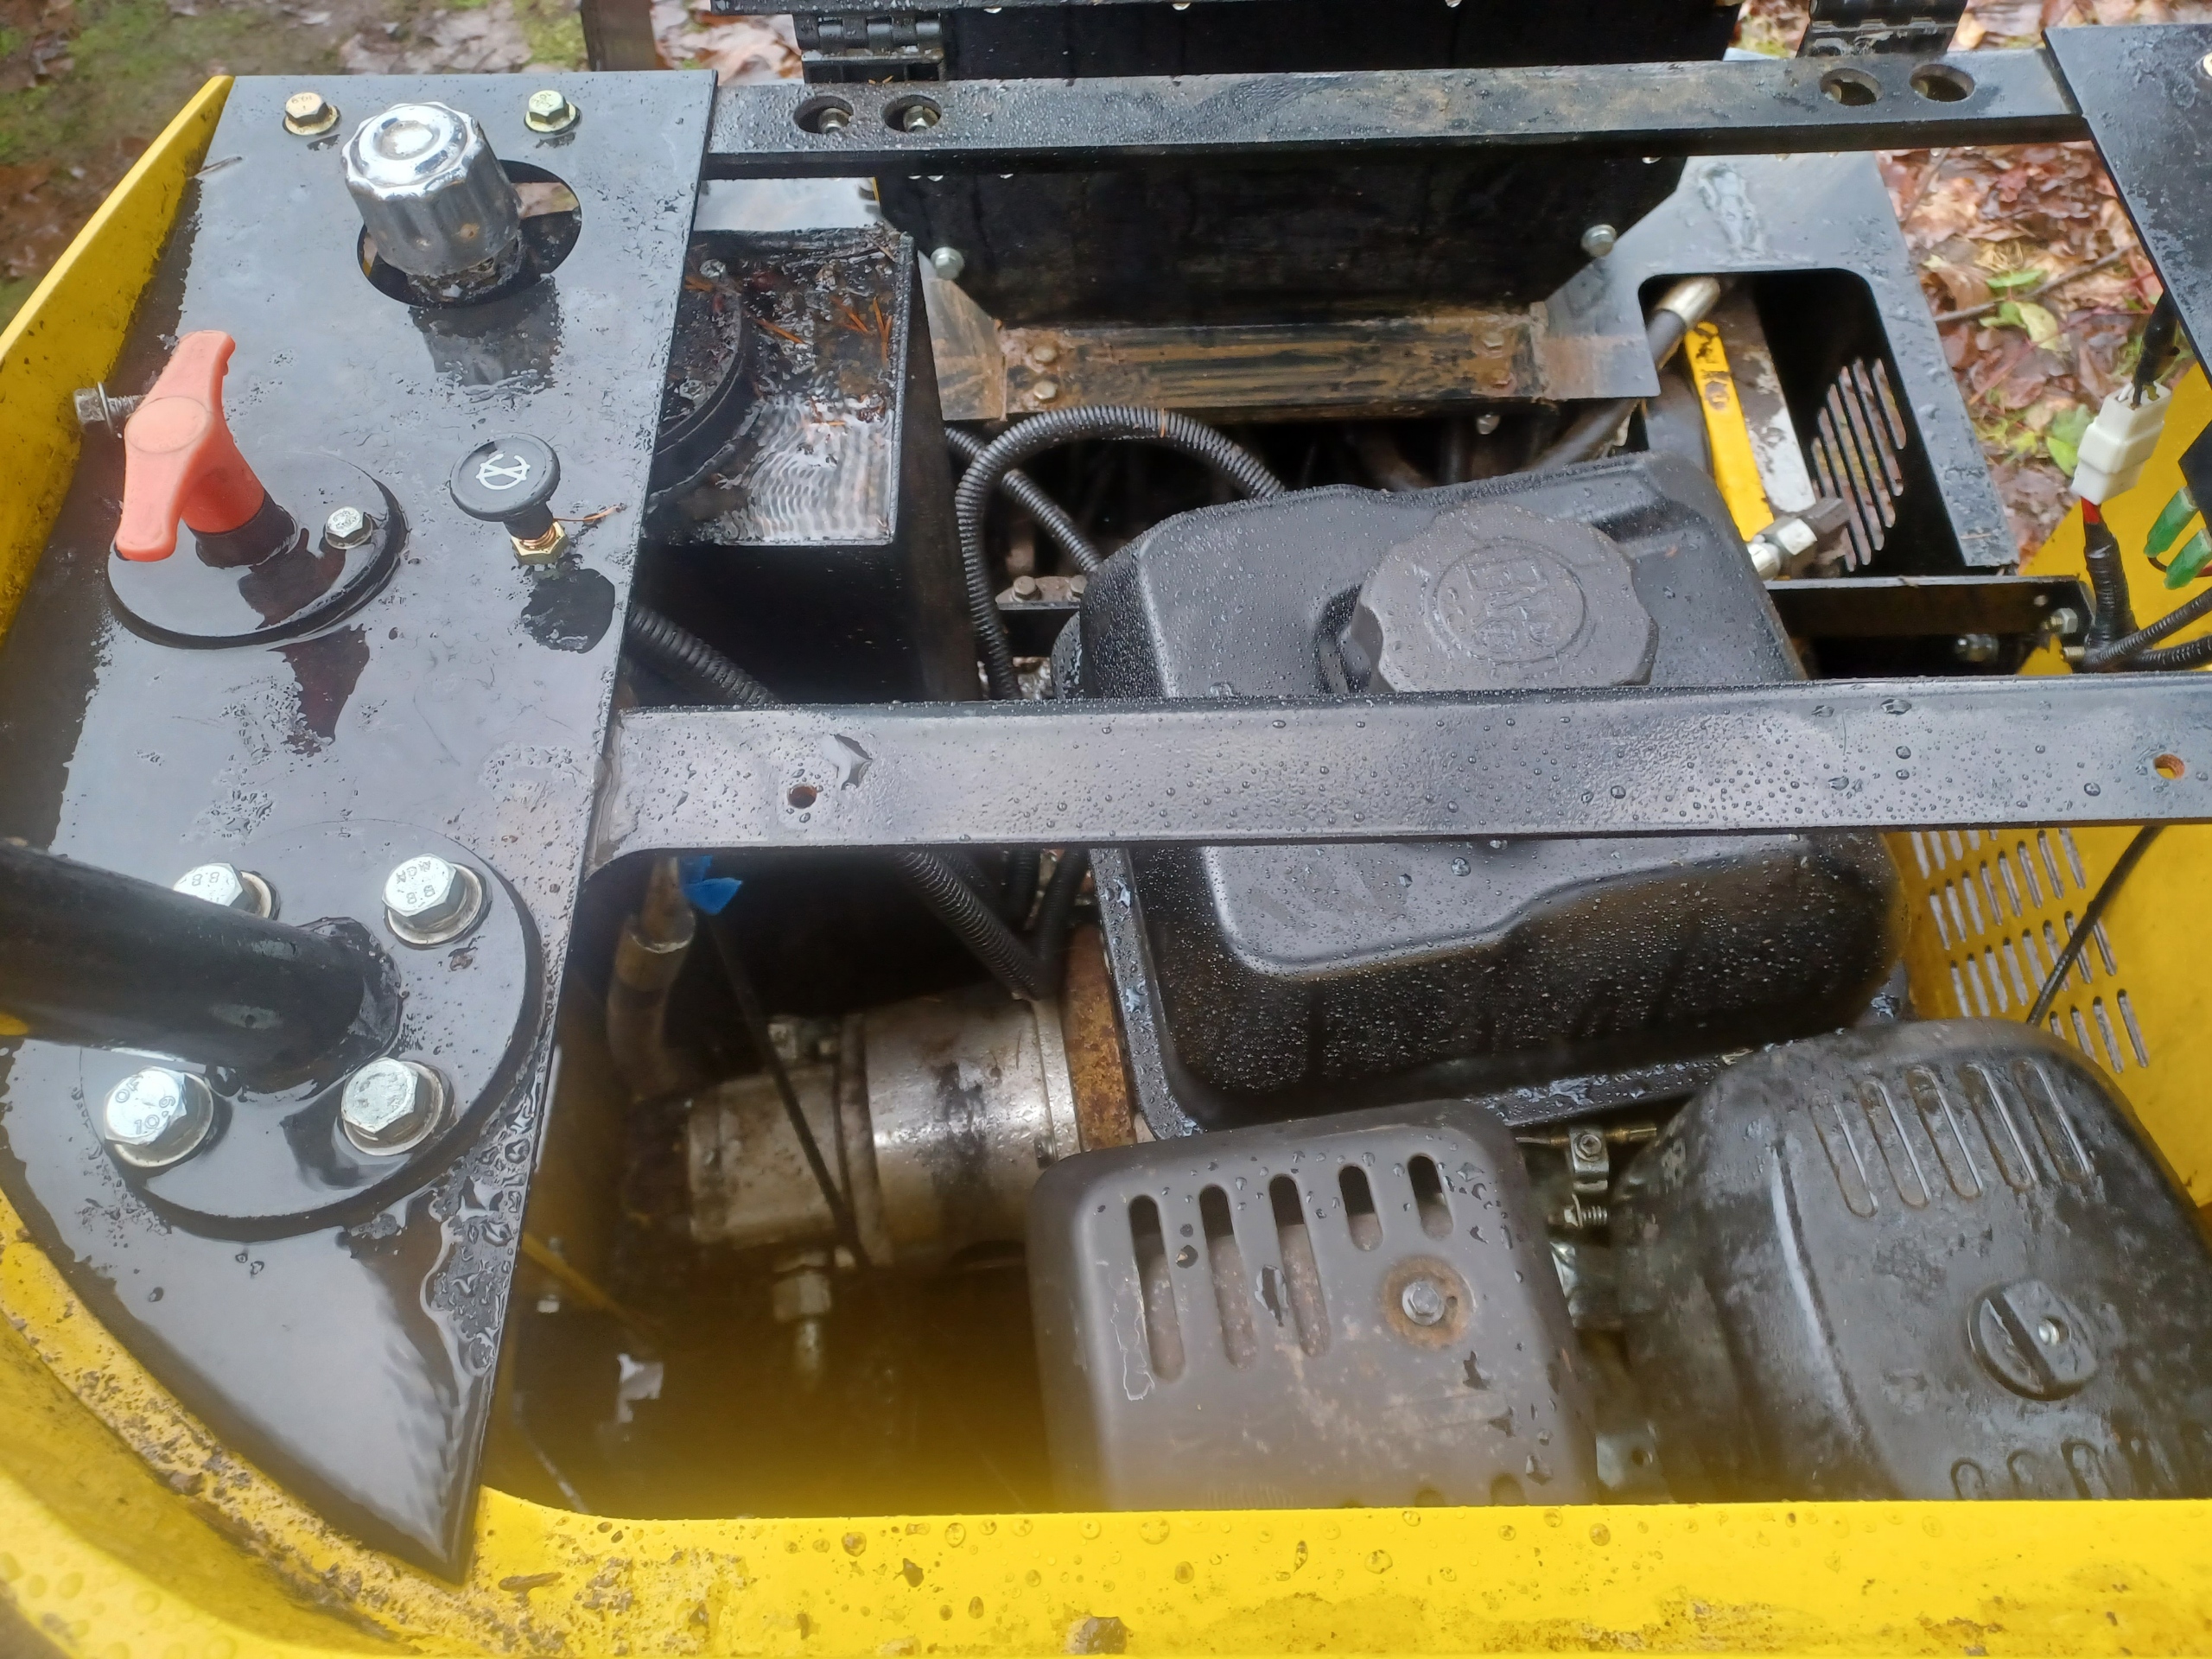 The GroundHog excavator needed a battery, ignition switch, and tune-up. Mobile mechanic in  Woodinville, Washington